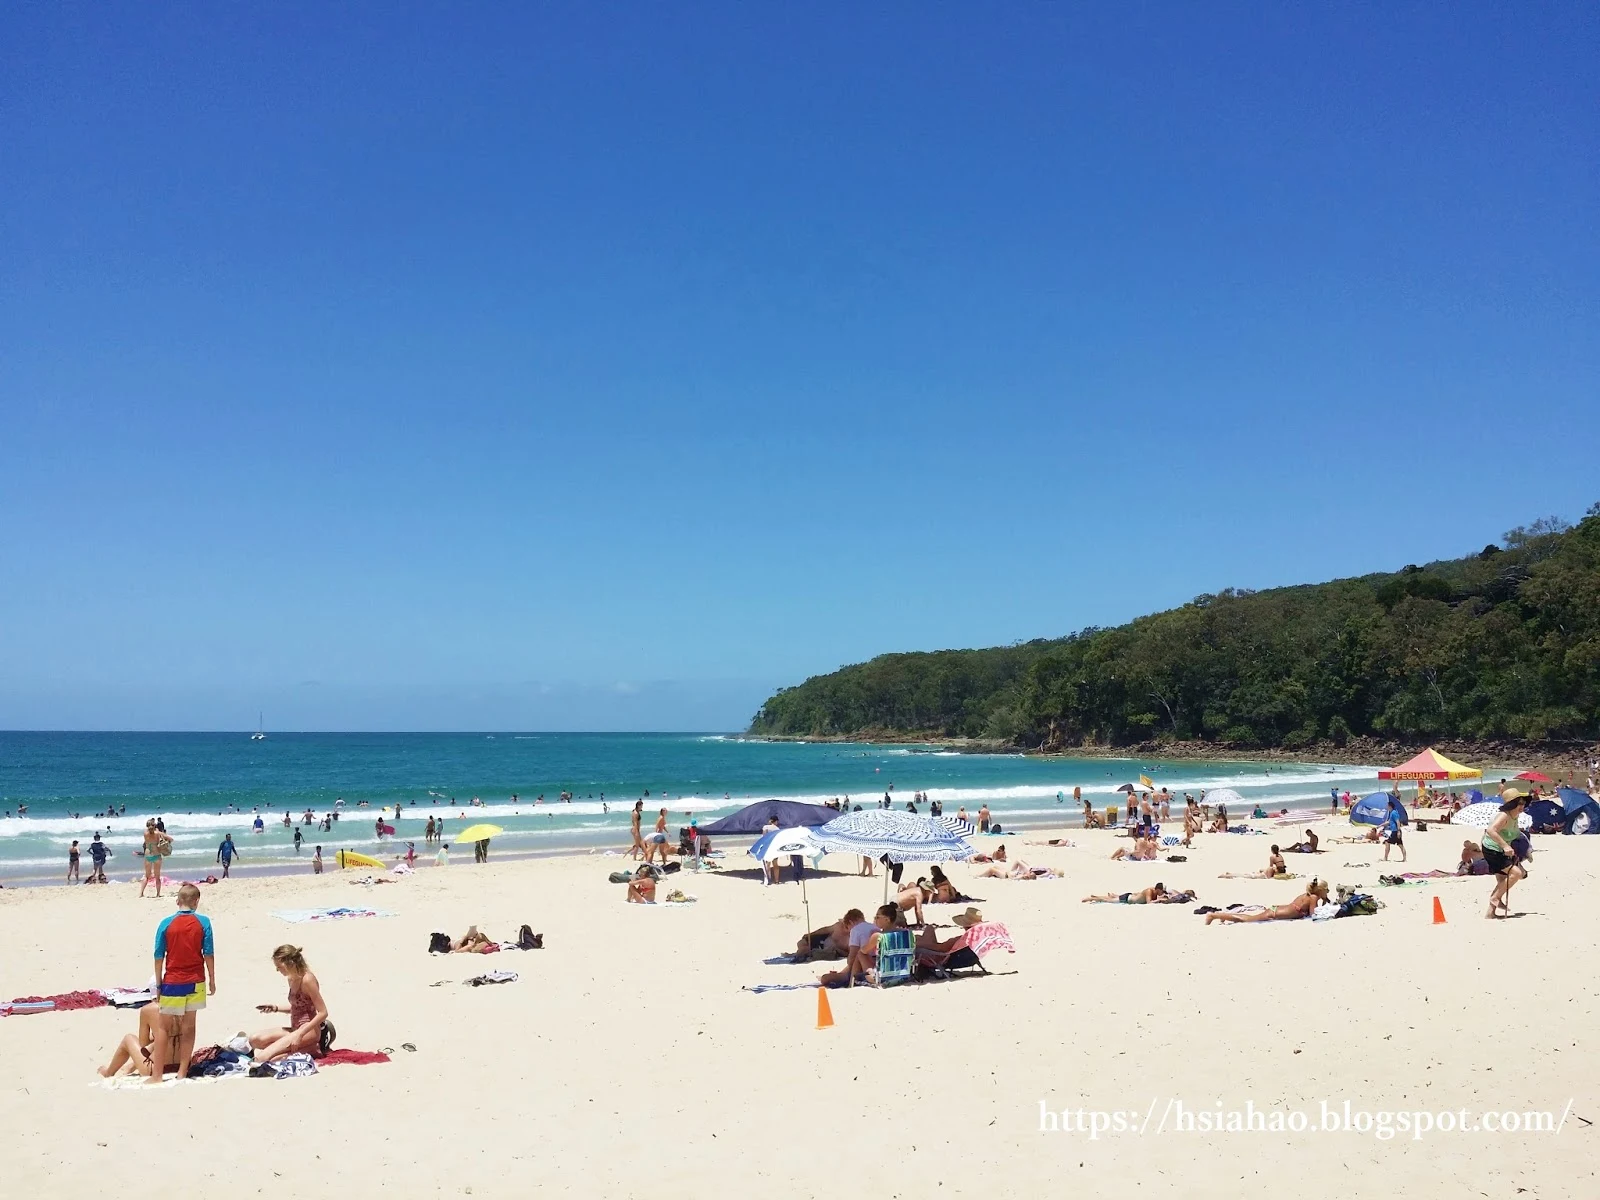 Sunshine-Coast-best-top-attraction-Noosa-Head-tourist-spots-Noosa-Main-Beach-Noosa-National-Park-fun-things-to-do-food-recommendation-holiday